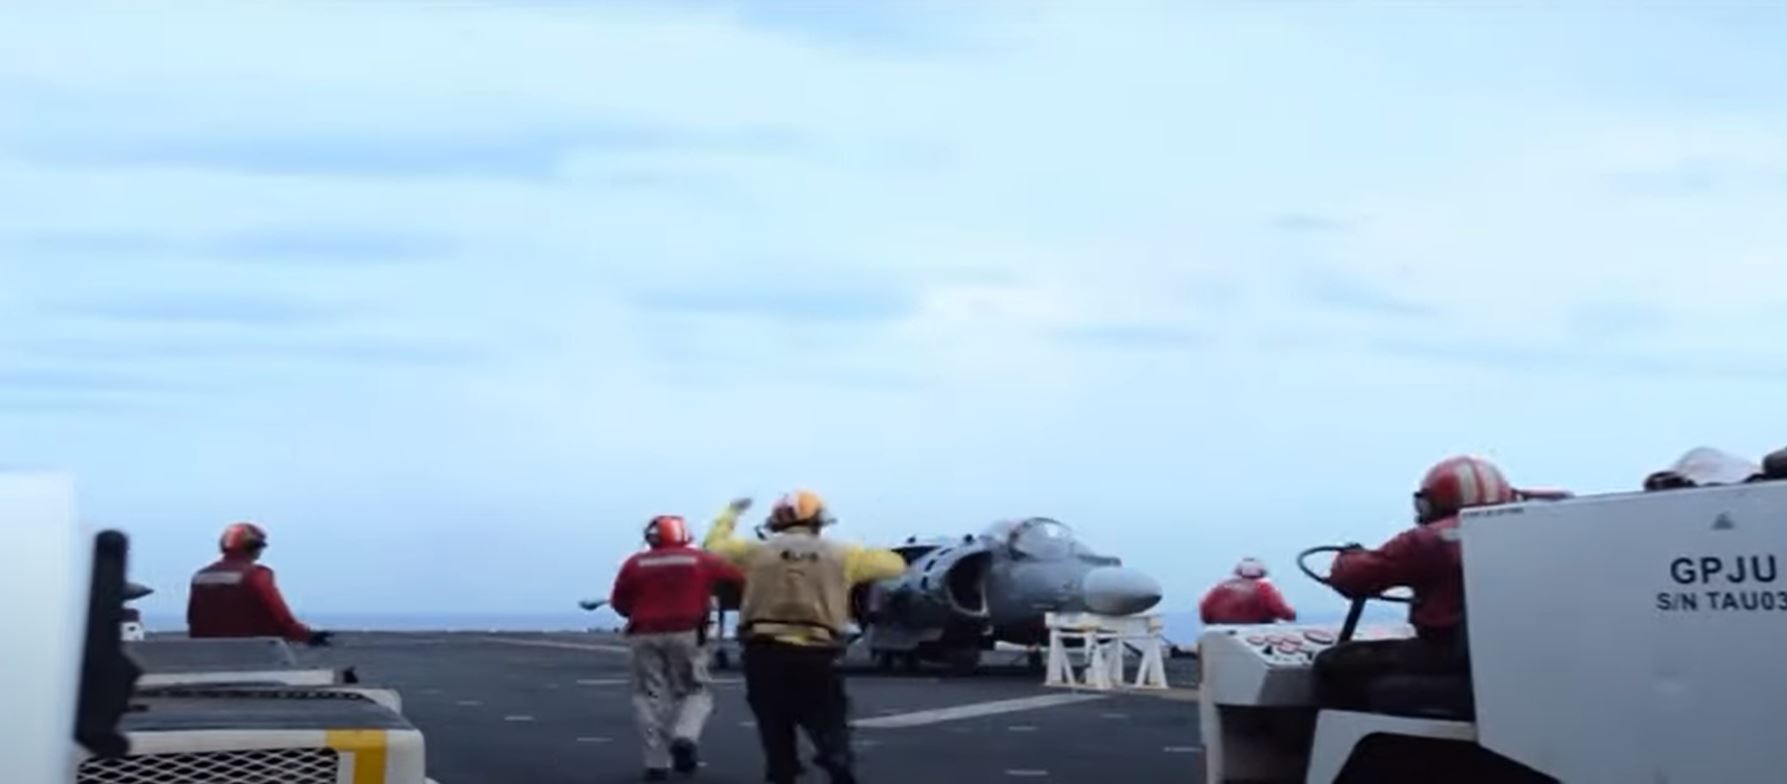 Meet Captain Mahoney, Who Landed A Harrier Precisely On A Stool 7